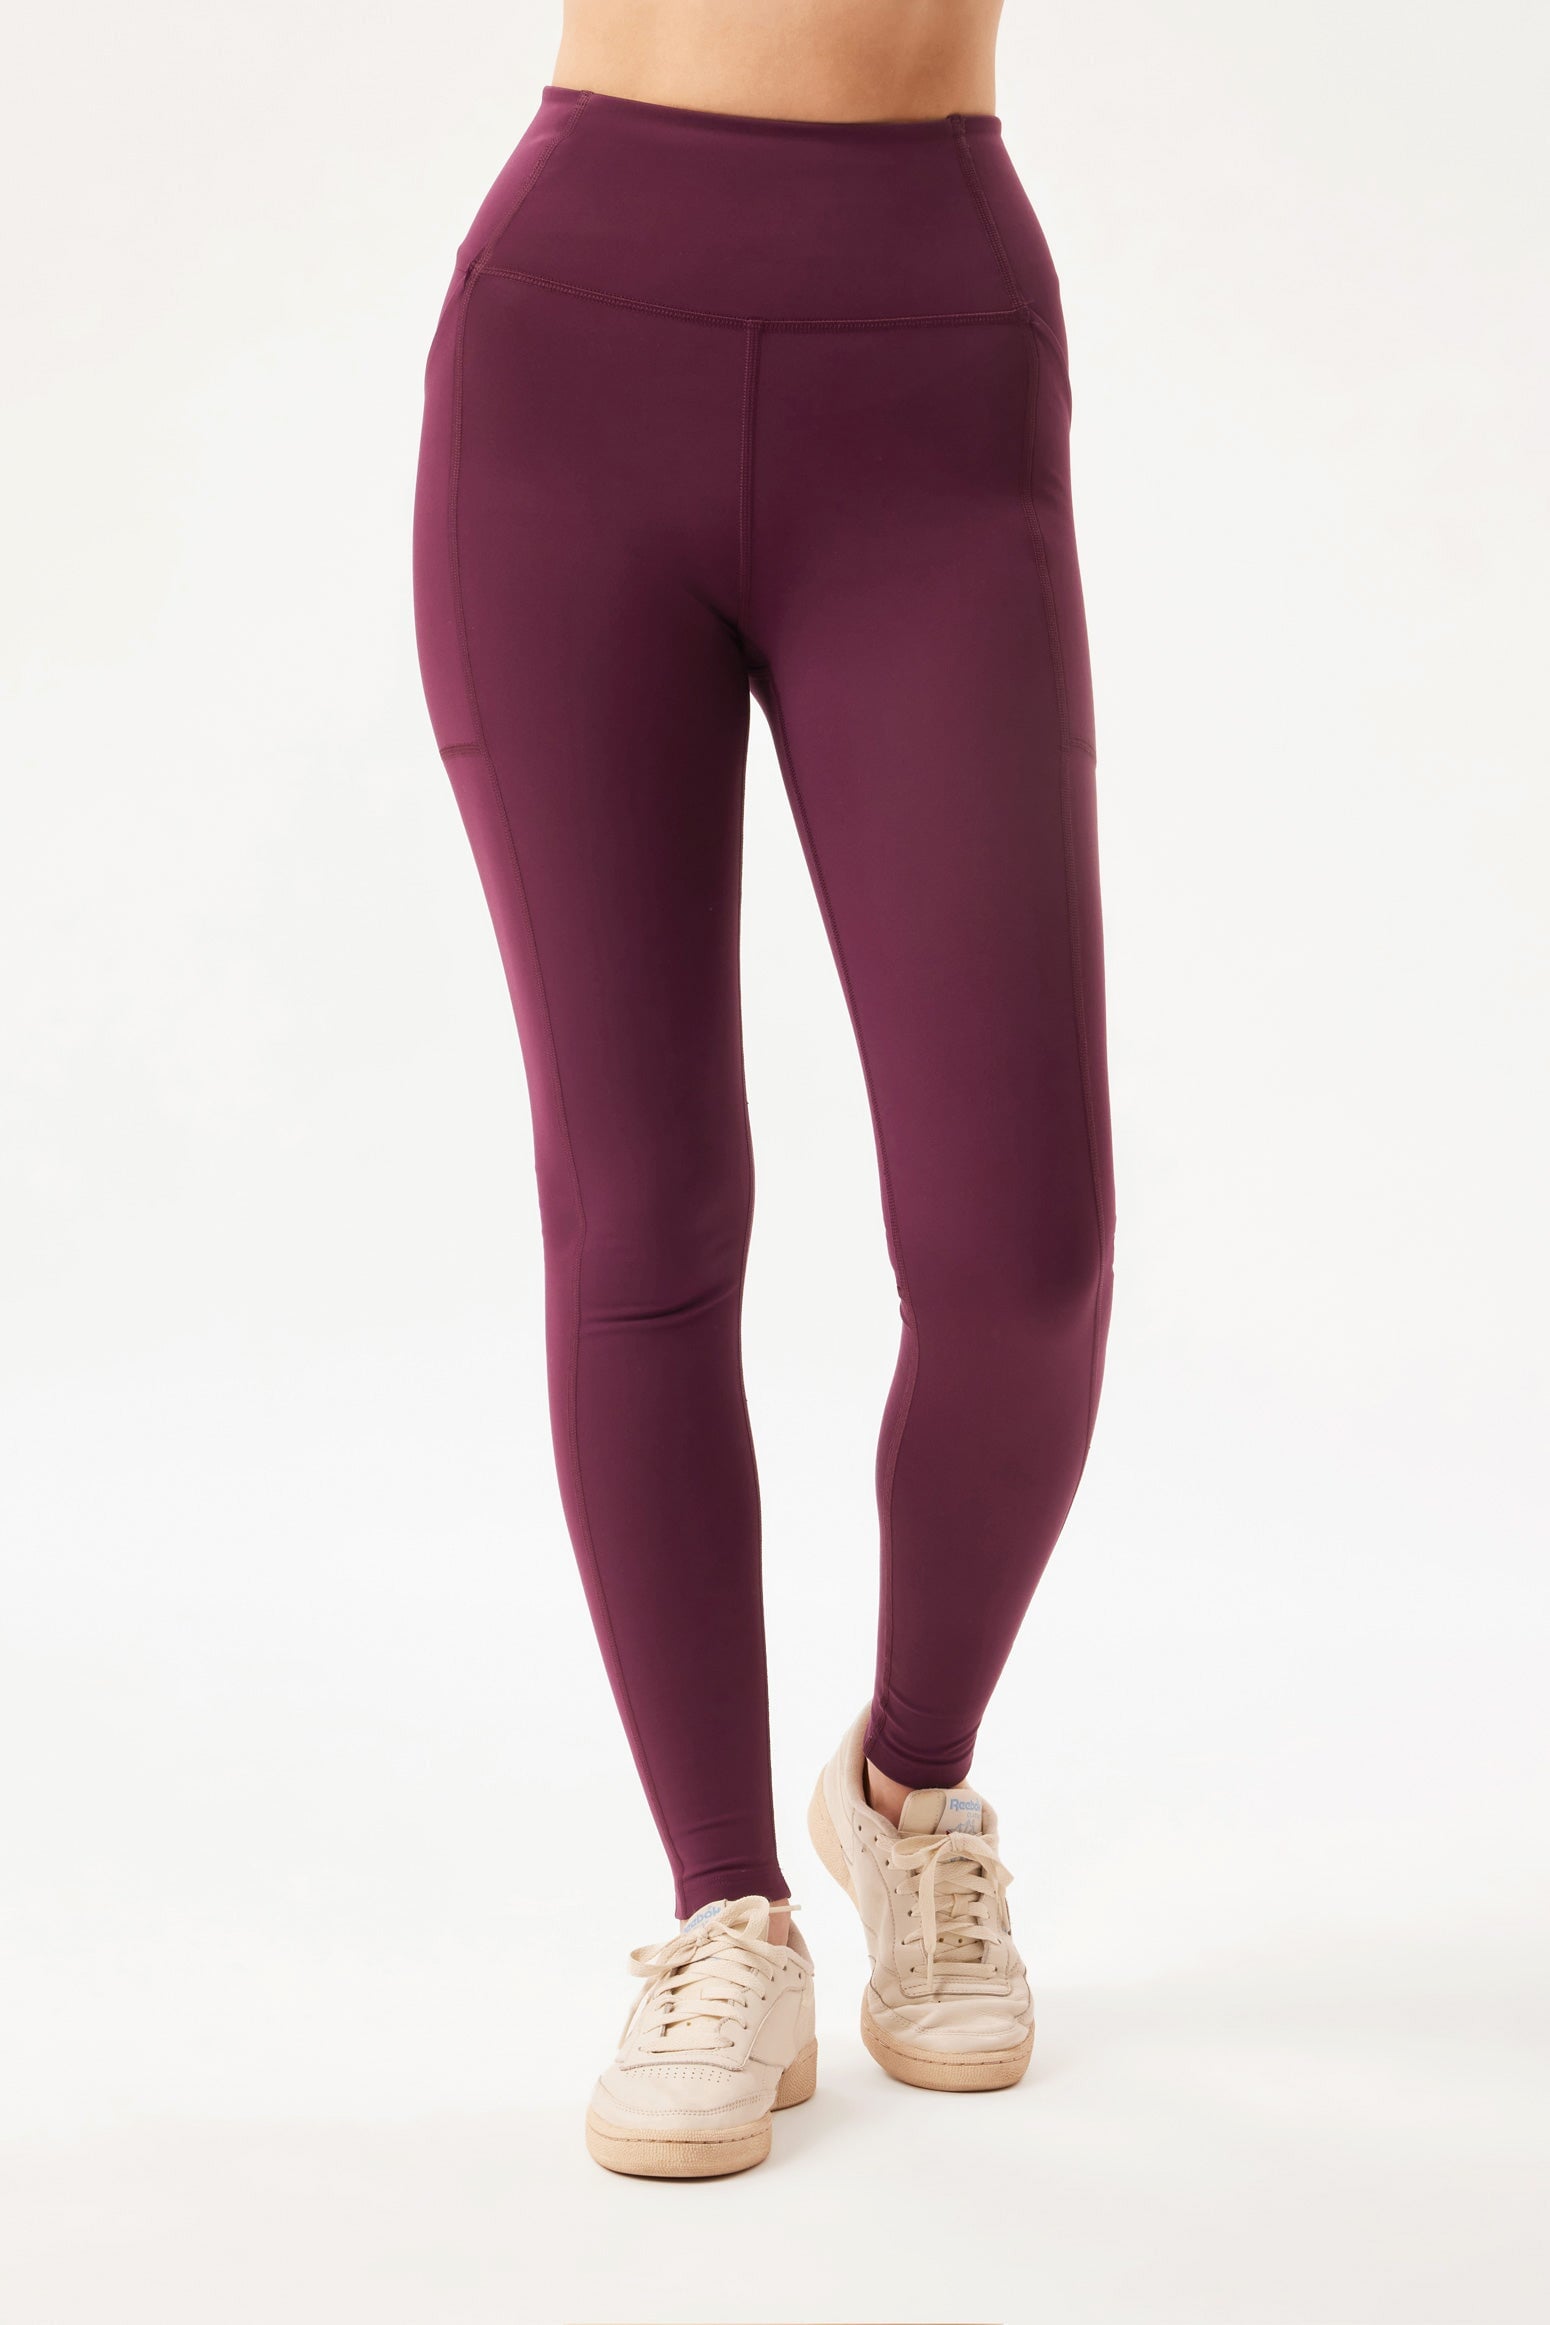 Girlfriend Collective Pocket Leggings High Rise Long in Moon, Ohh! By Gum